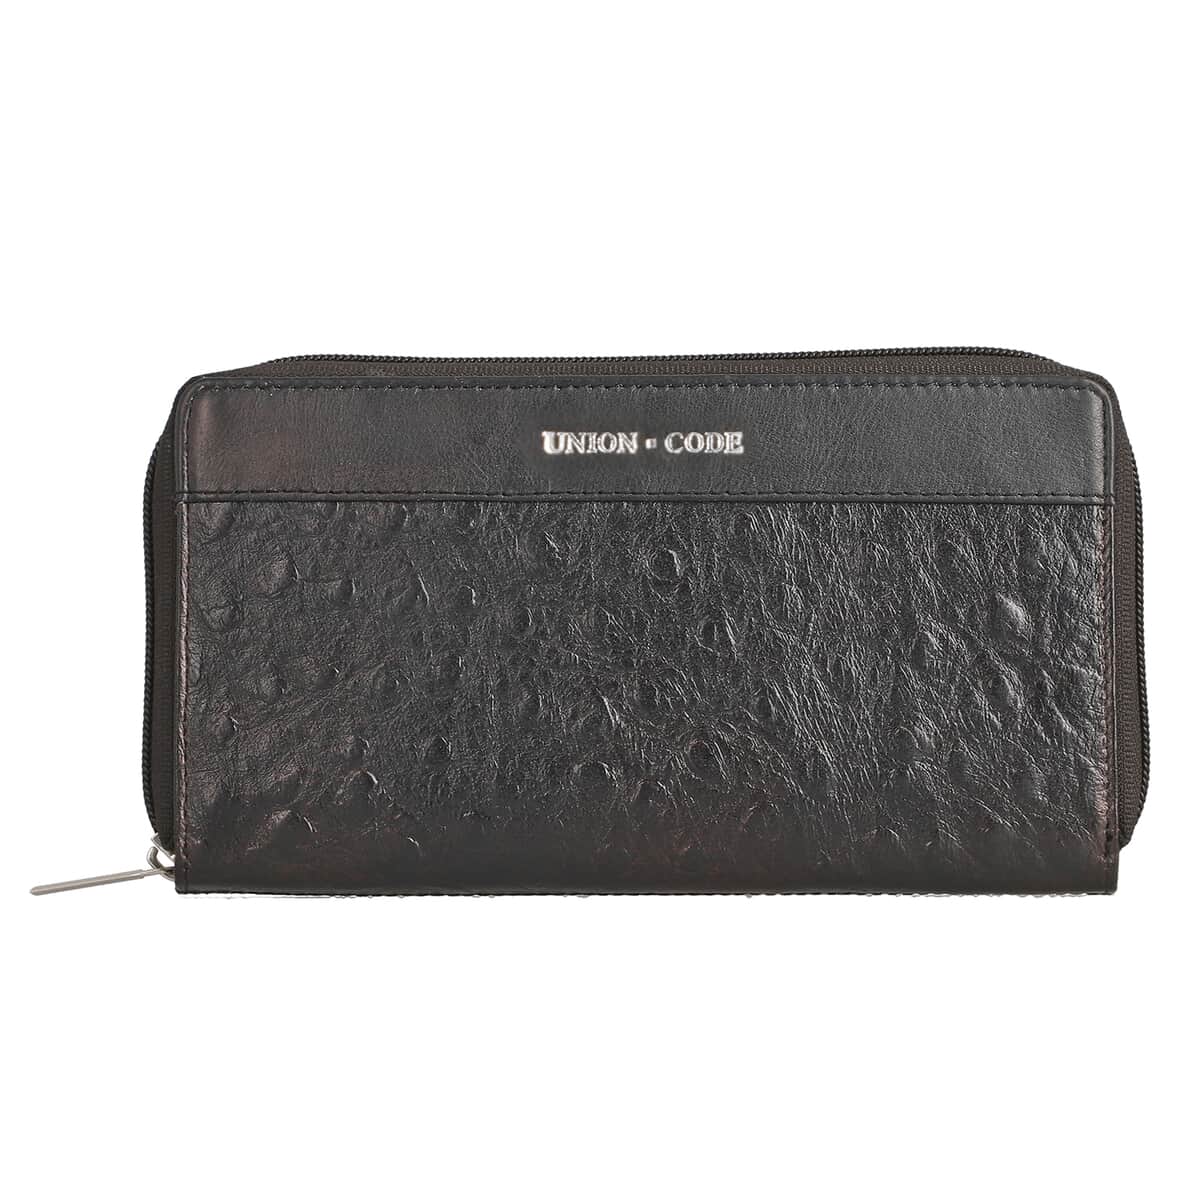 Union Code Black Genuine Leather Ostrich Embossed RFID Protected Women's Wallet image number 0